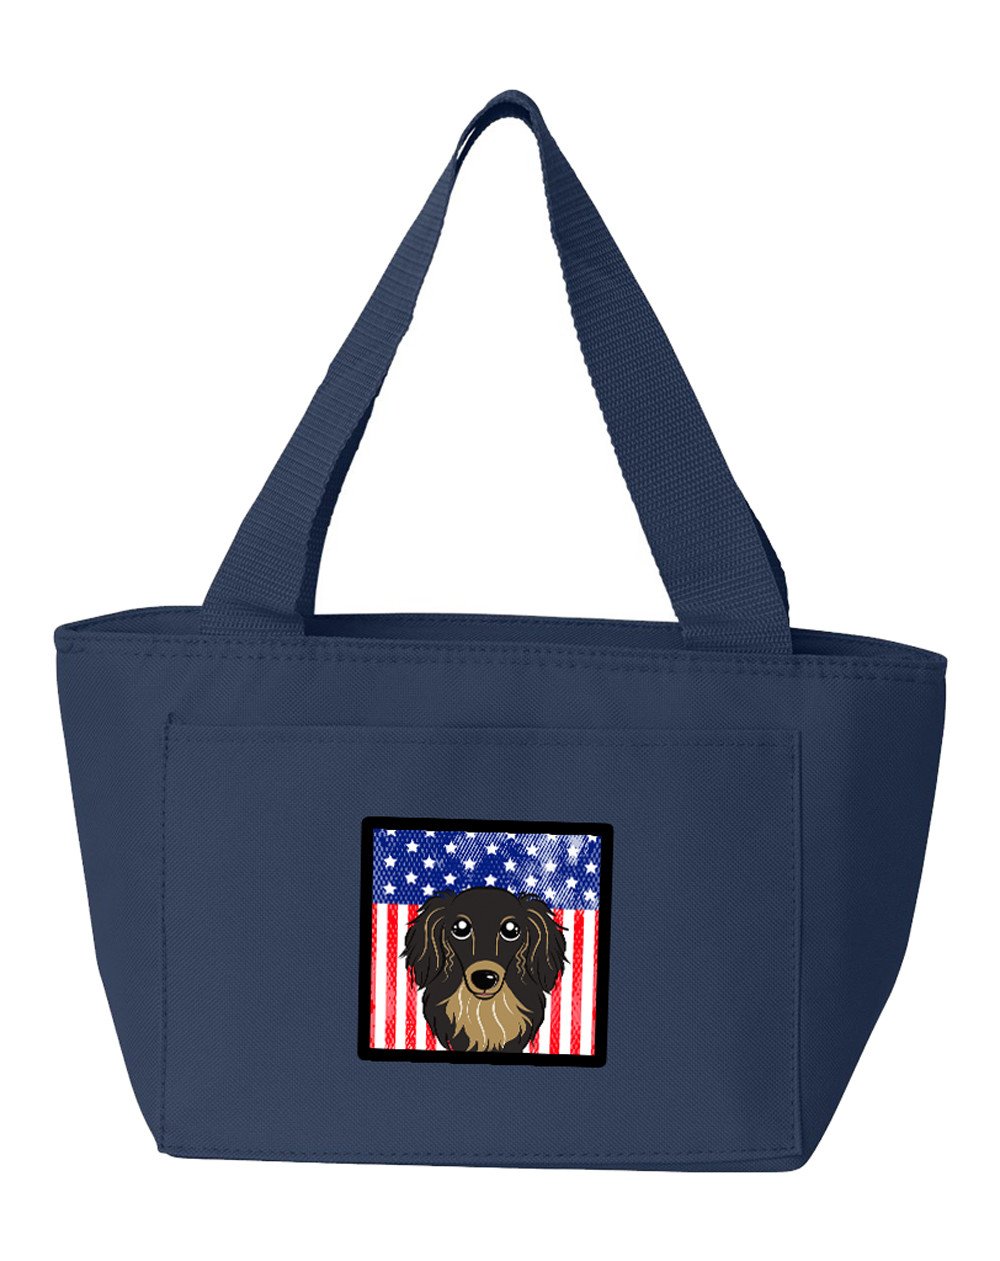 American Flag and Longhair Black and Tan Dachshund Lunch Bag BB2143NA-8808 by Caroline's Treasures